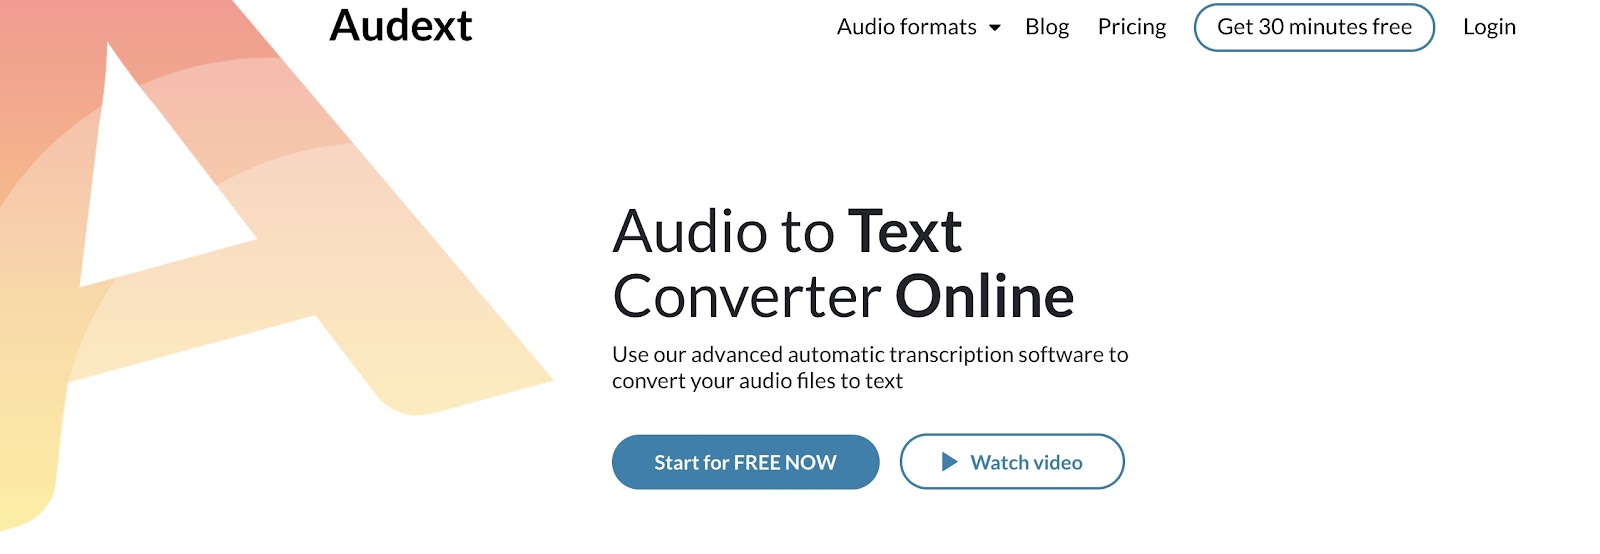 37 Best Audio-to-Text Converter To Step Up Productivity Softlist.io